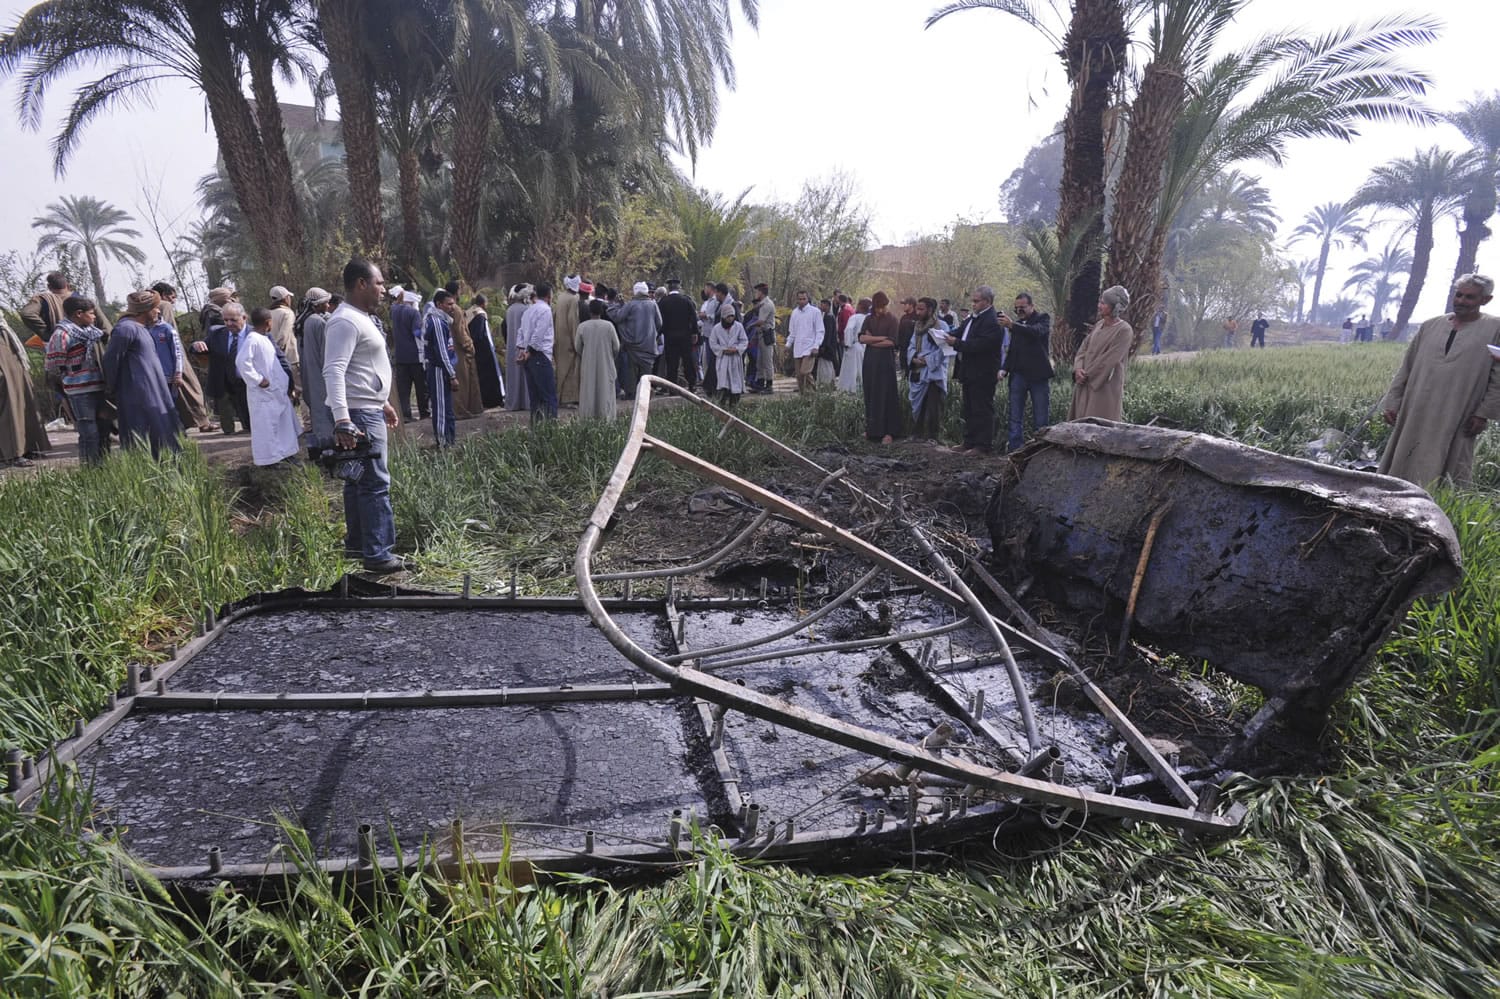 Egyptians gather at the site of a balloon crash where the remains of the burned gondola are seen, outside al-Dhabaa village, just west of the city of Luxor, south of Cairo, Egypt, on Tuesday.